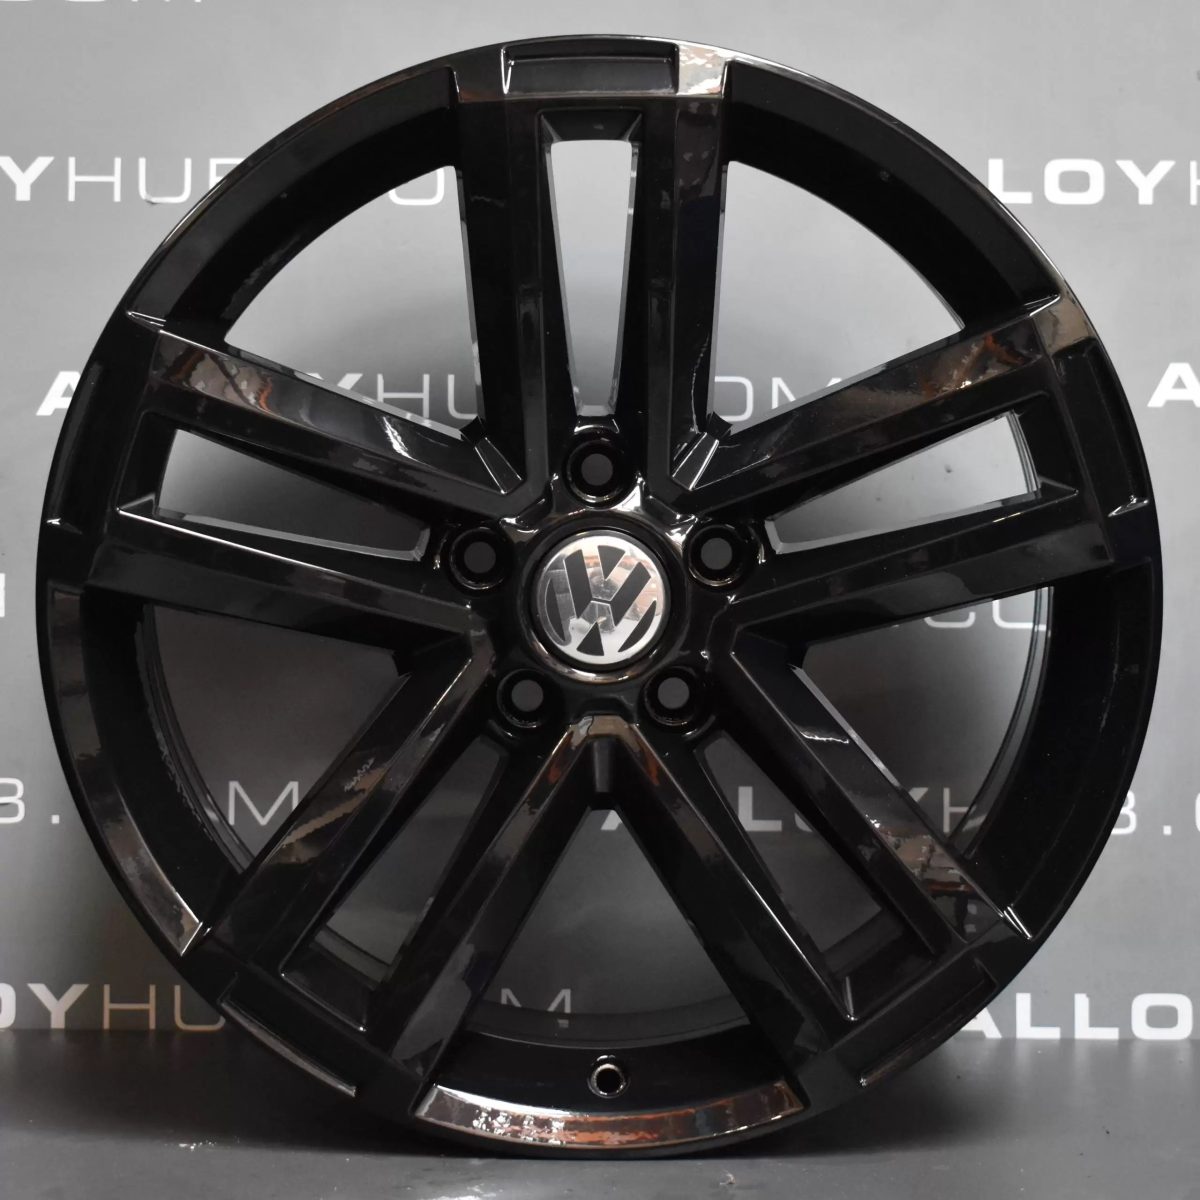 Genuine Volkswagen Transporter T5 T6 Cantera 5 Twin Spoke 19" Inch Alloy Wheel with Gloss Black Finish 2H0 601 025 AD